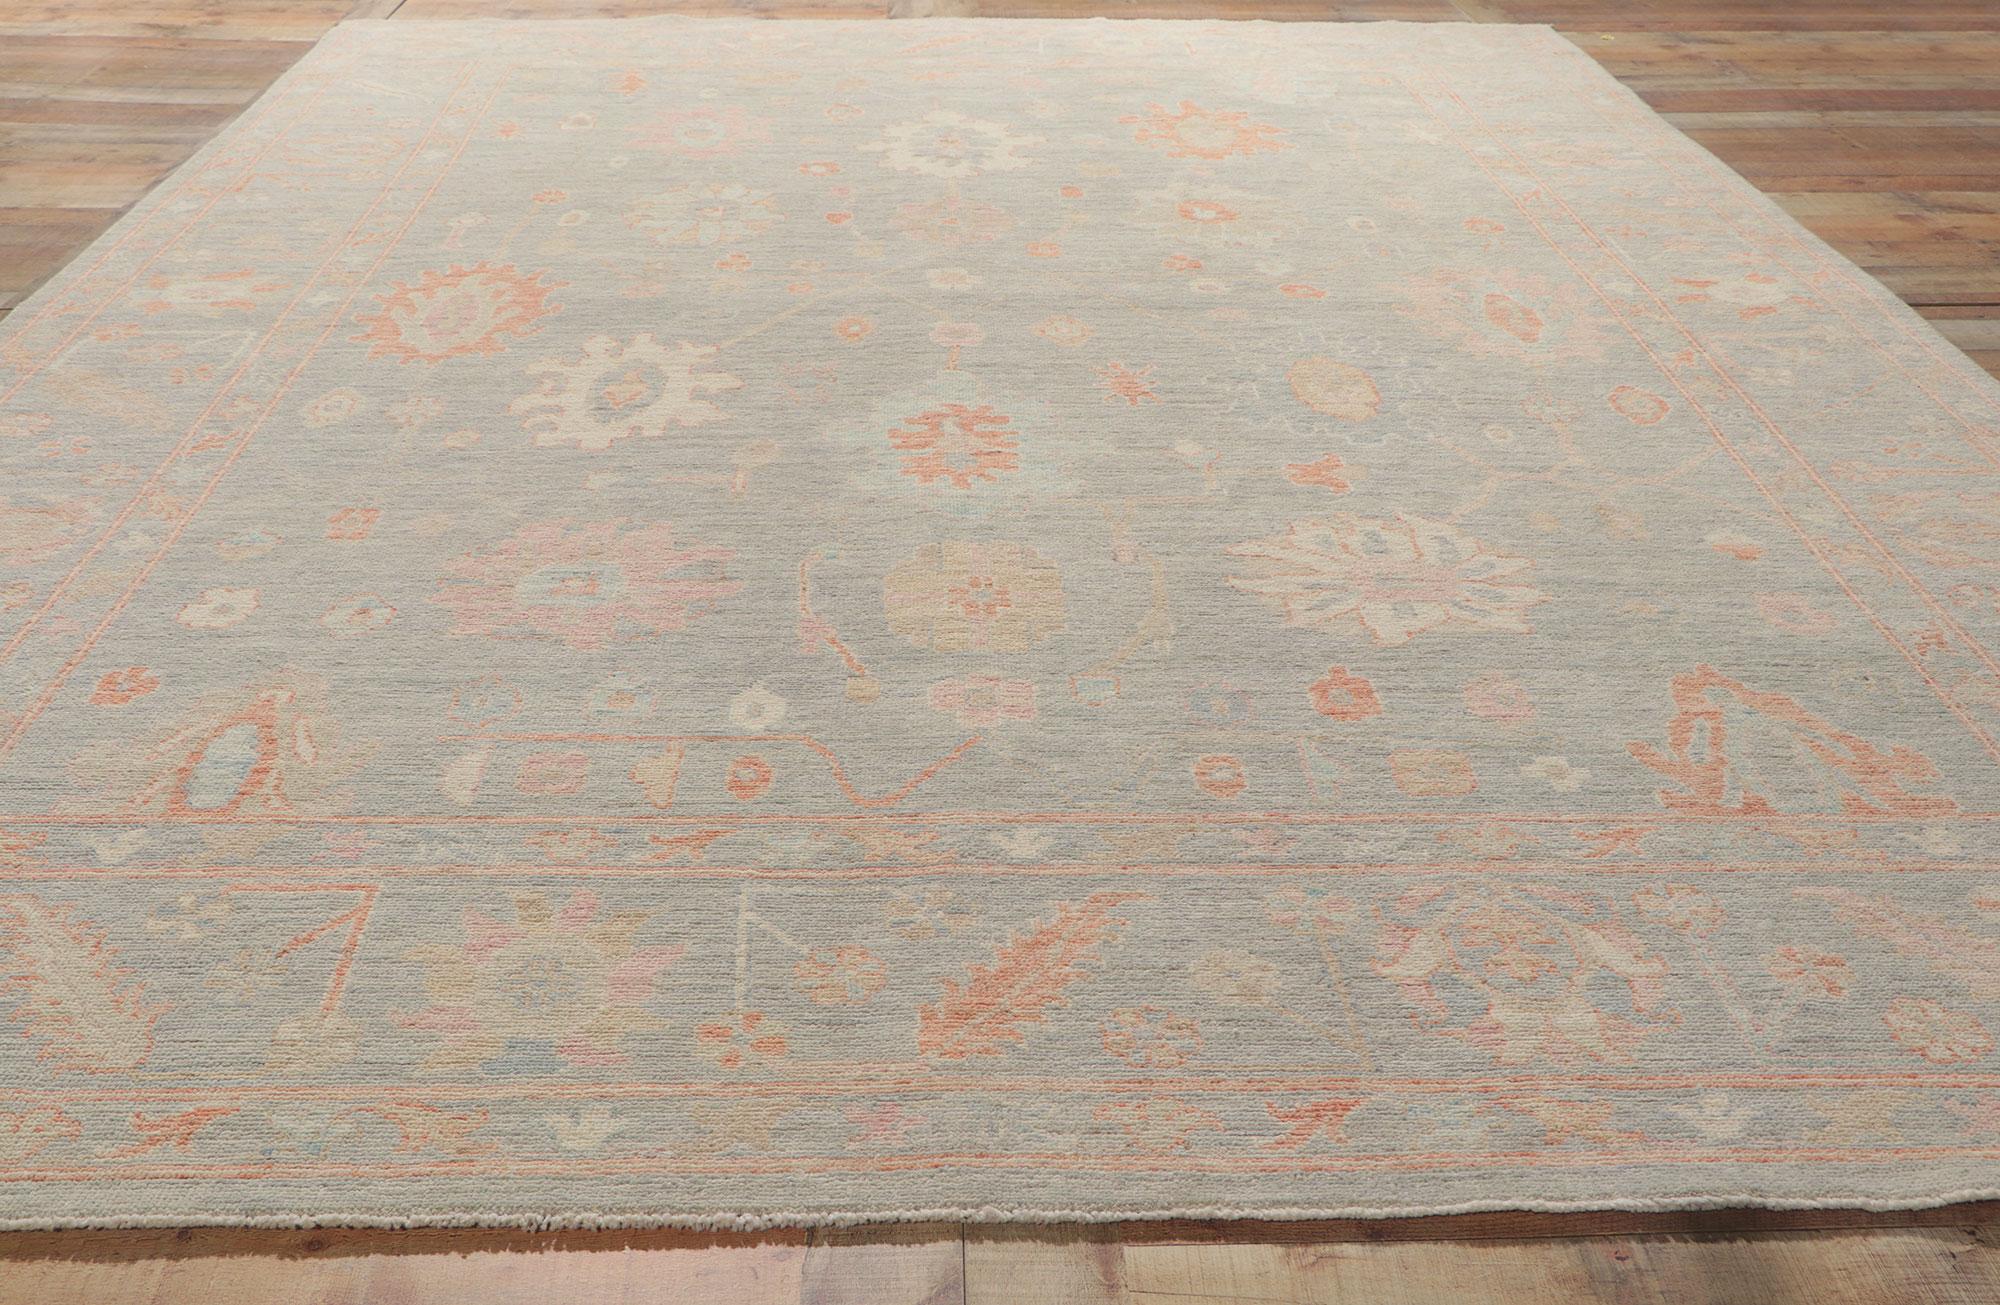 Vintage-Inspired Muted Oushak Rug, Modern Style Meets Nostalgic Charm For Sale 1